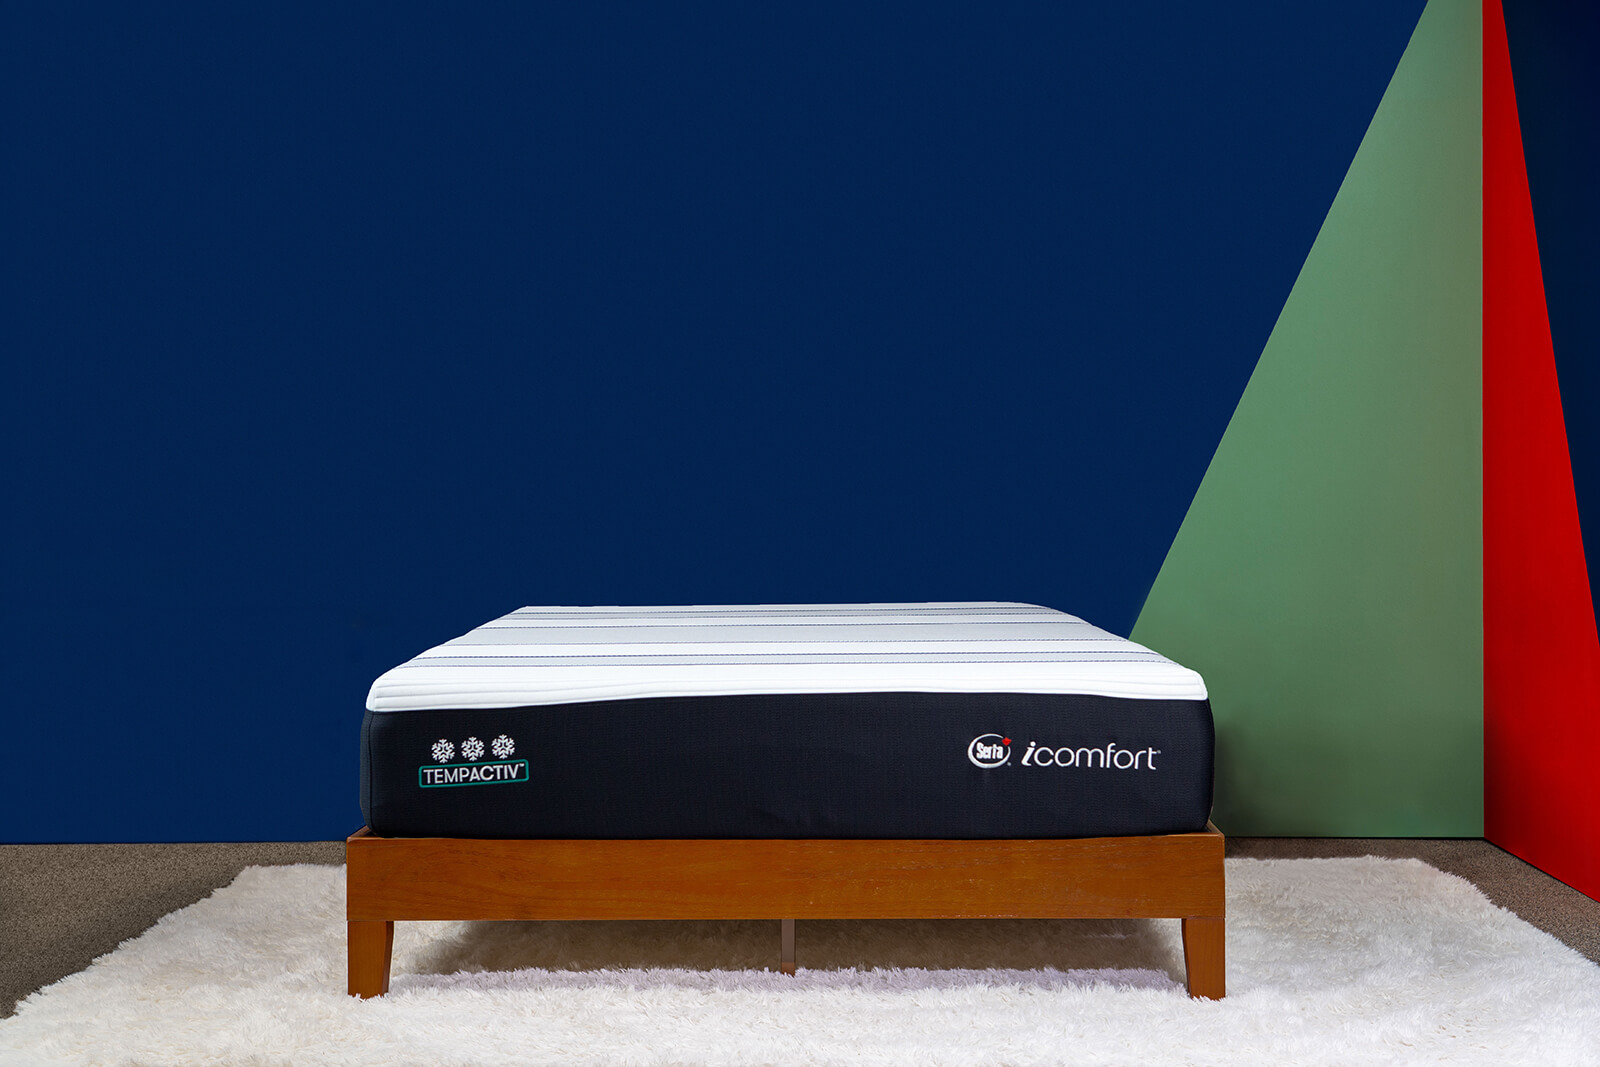 Distant photo of the Serta iComfort TempActiv I Mattress on a bedframe in a bedroom taken from a front angle.